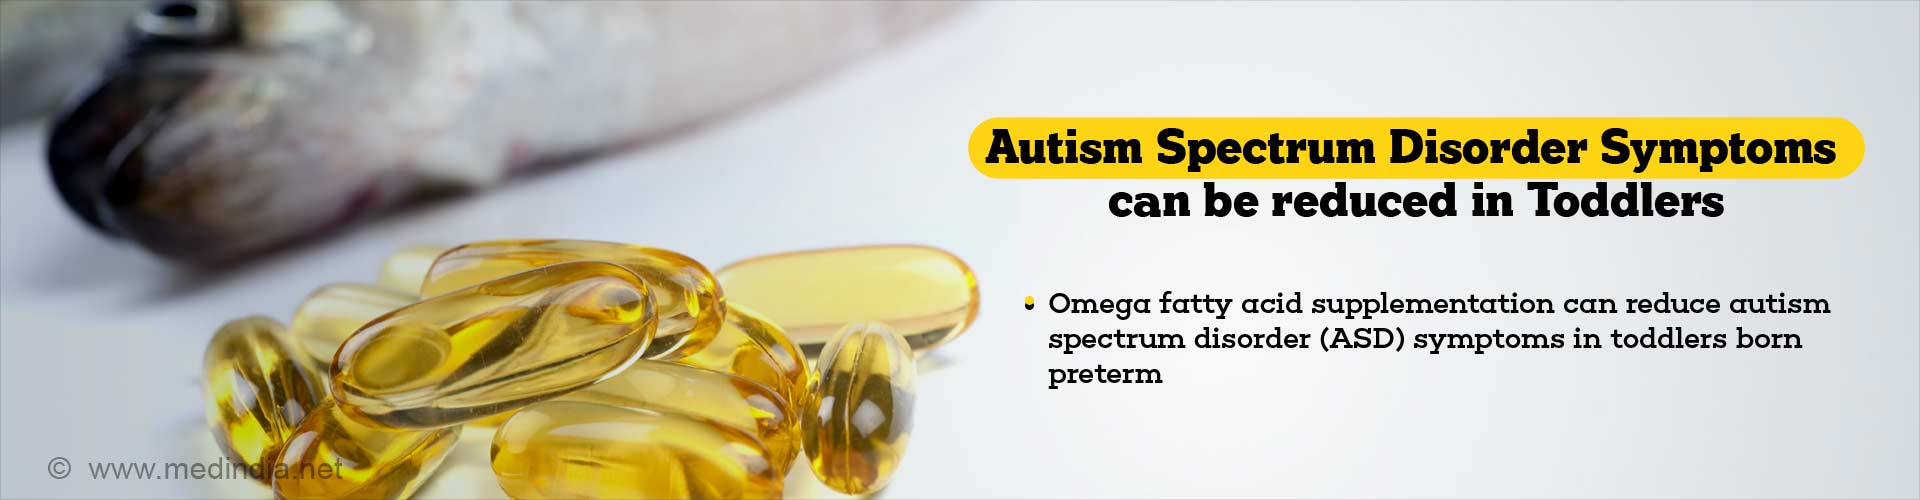 autism spectrum disorder symptoms can be reduced in toddlers
- omega fatty acid supplementation can reduce autism spectrum disorder (ASD) symptoms in toddlers born pre-term